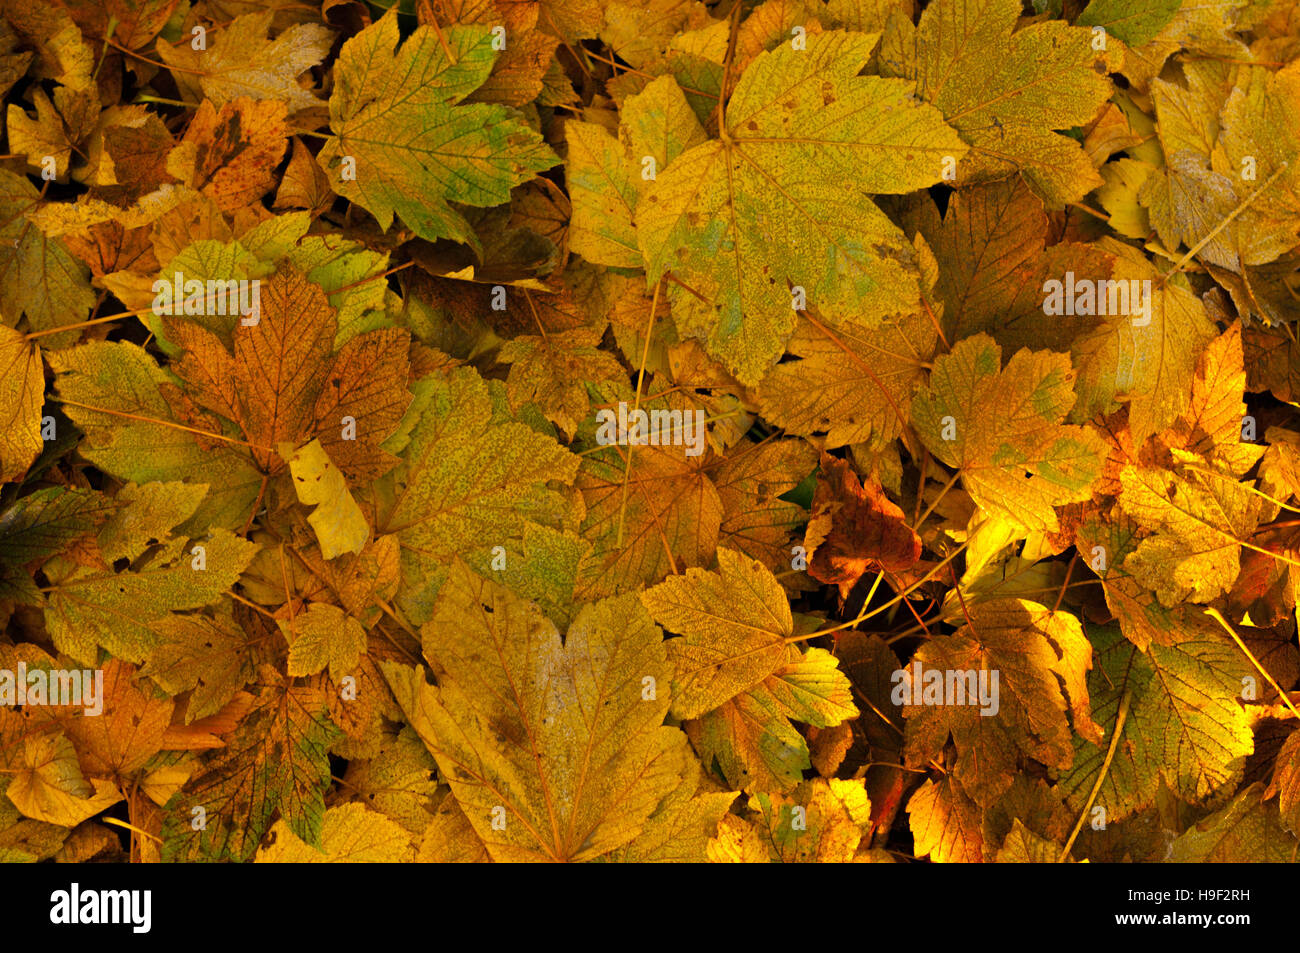 Collage Effect with Autumnal Leaves Stock Photo